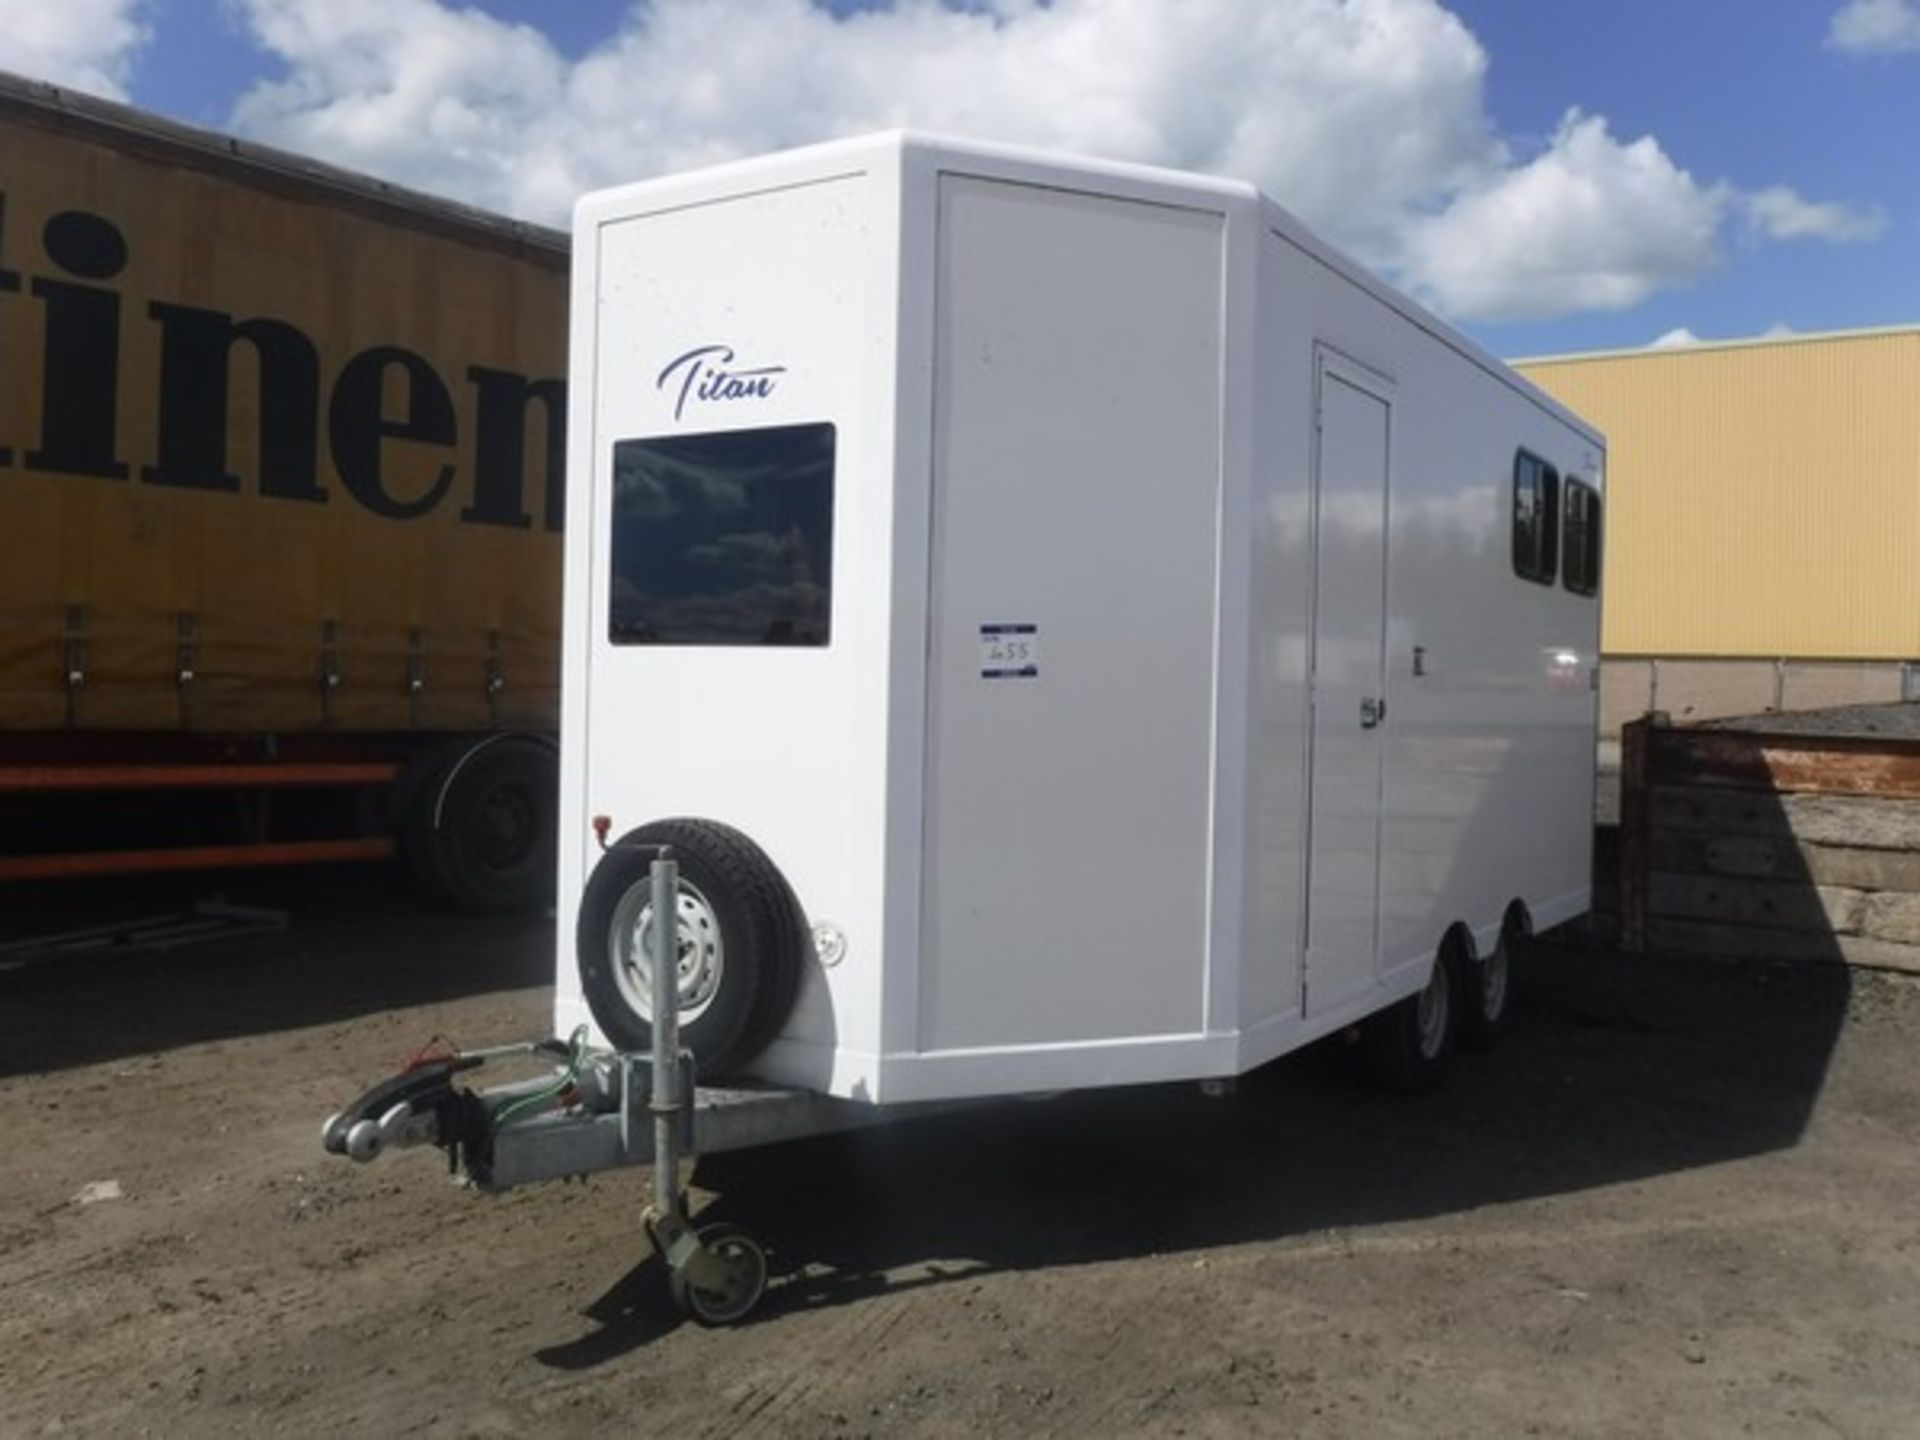 TITAN GLACIER 2 HORSE TRAILER WITH LIVING ACCOMODATION FOR 3, WILL CARRY 2 X 15.2HH & 1 X 12HH OR 2